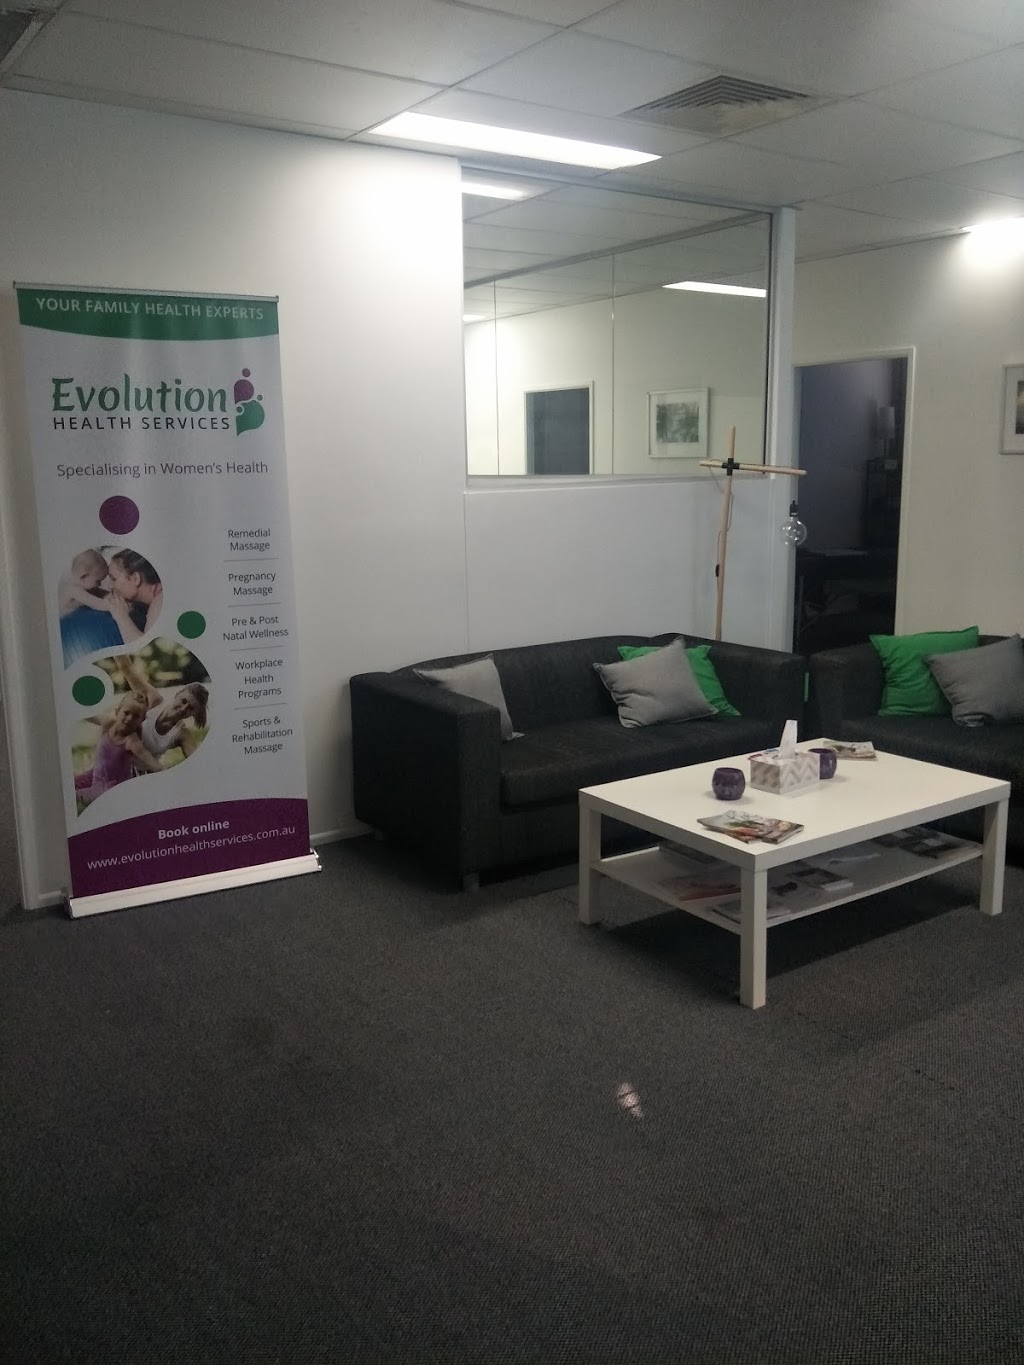 Evolution Health Services | health | 3/150 Lindesay St, Campbelltown NSW 2560, Australia | 0289641673 OR +61 2 8964 1673